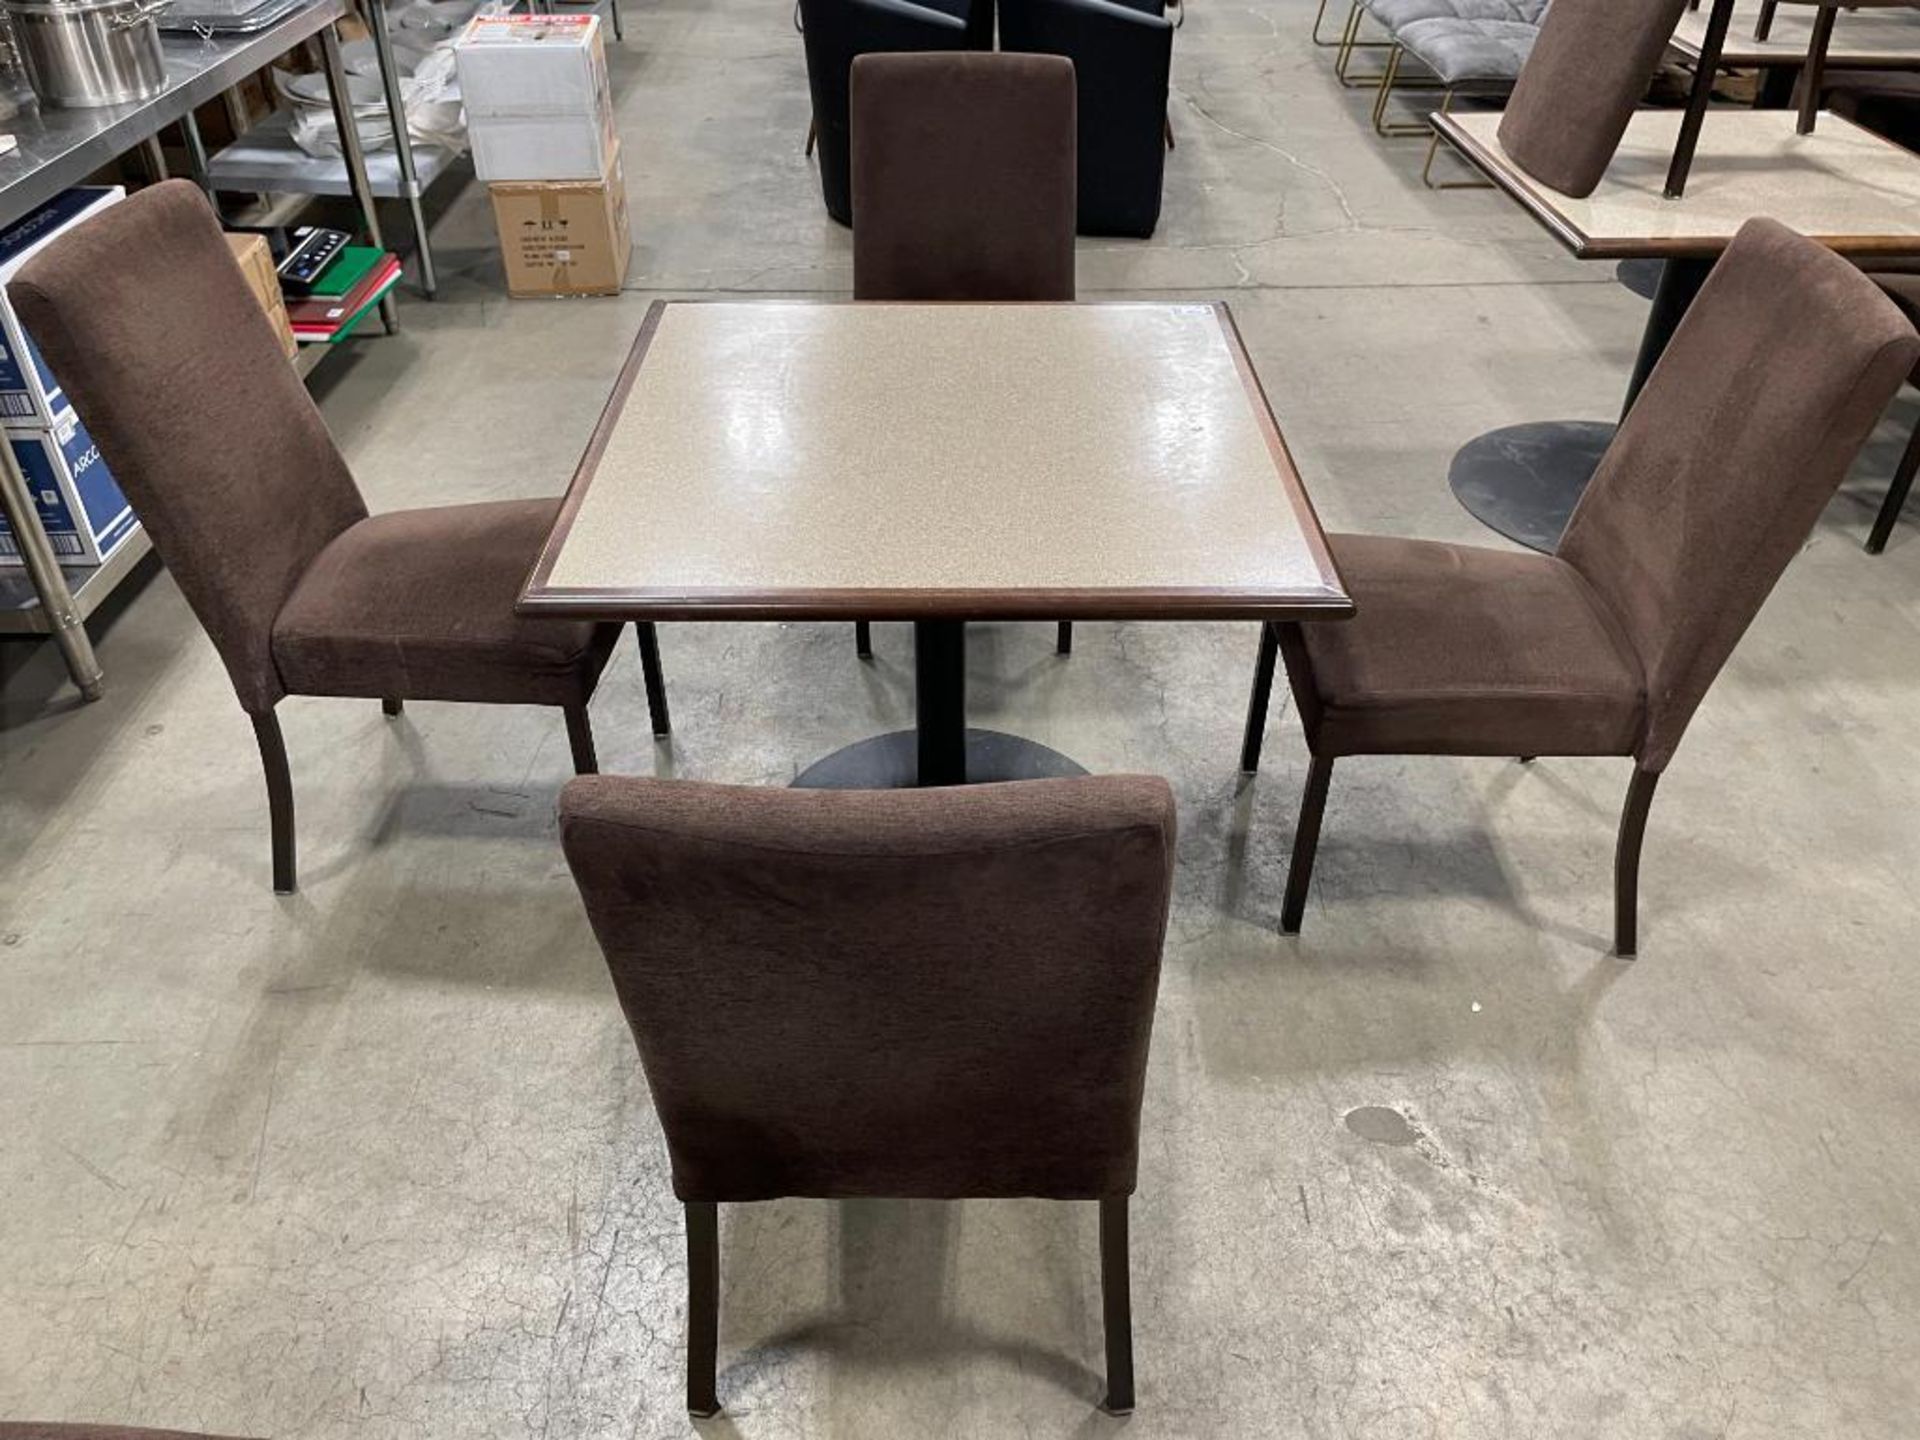 36" X 36" DINING TABLE WITH (4) MTS KILO DINING CHAIRS - Image 3 of 10